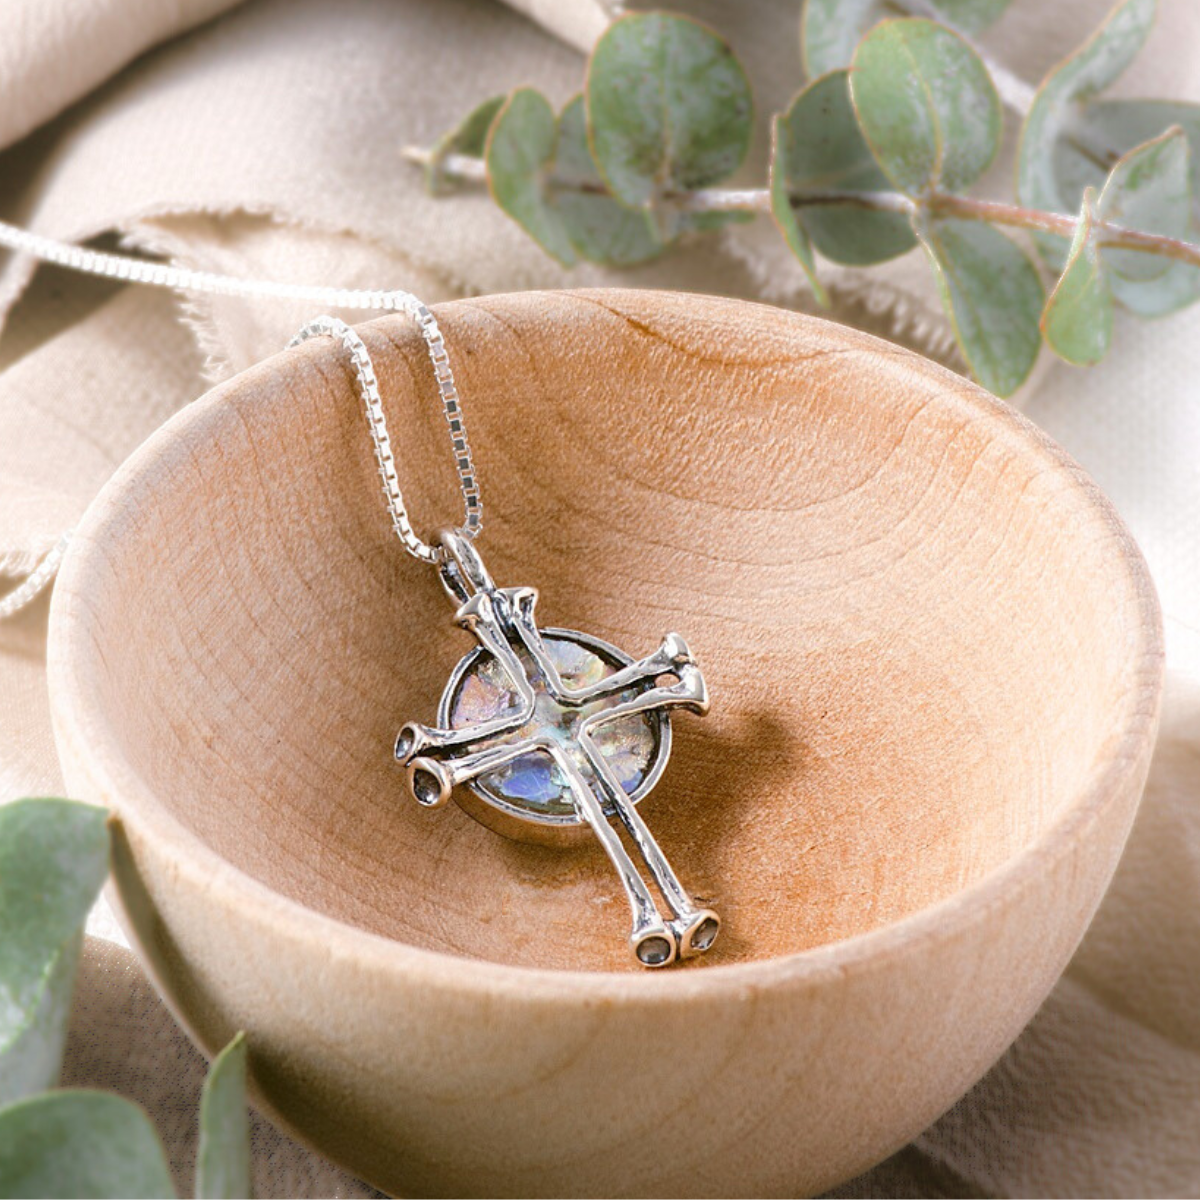 Cross Necklaces & Symbolic Christian Jewelry Made in the USA